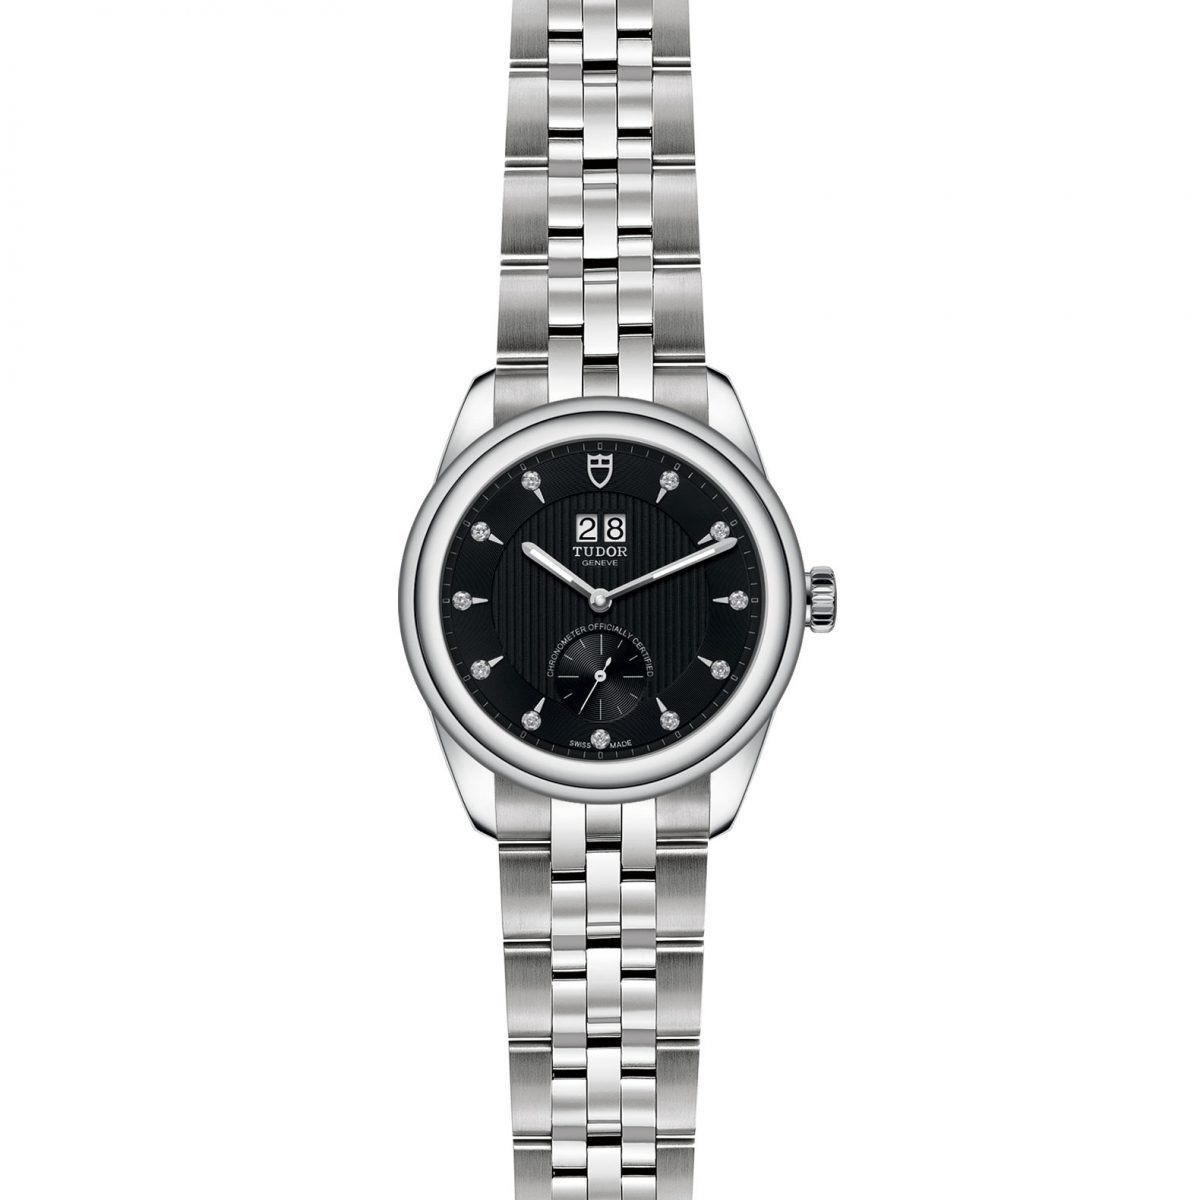 Glamour Double Date Automatic 42mm Watch